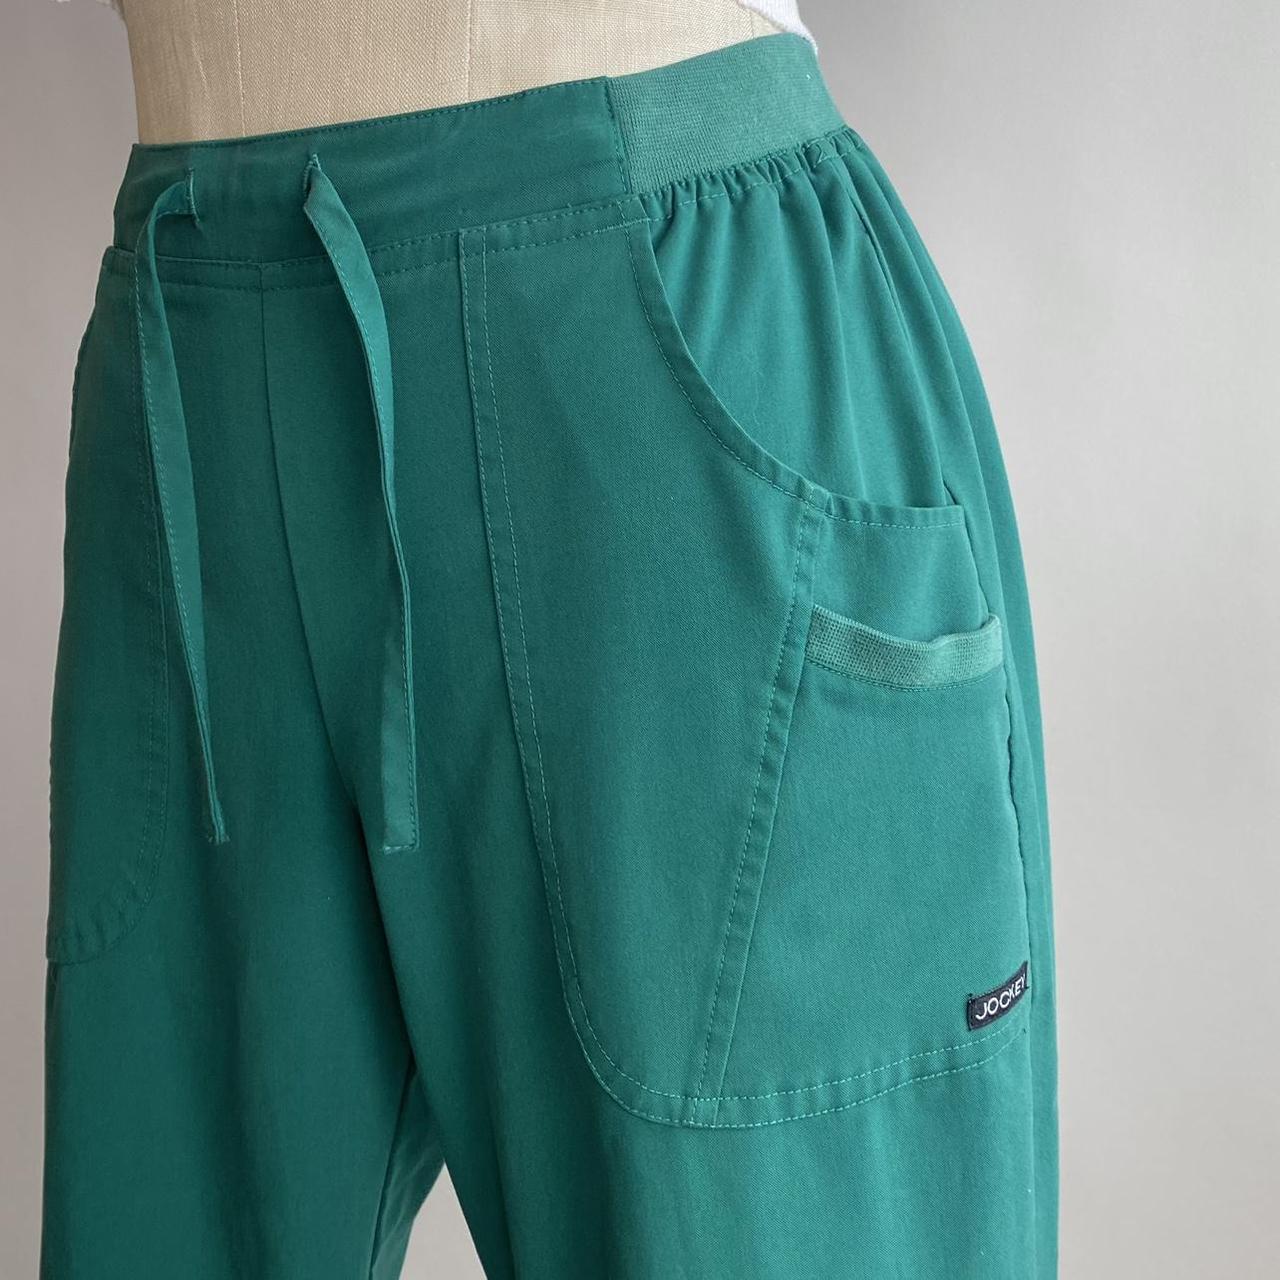 Product Image 2 - Forest Green Pants 

Lightweight forest